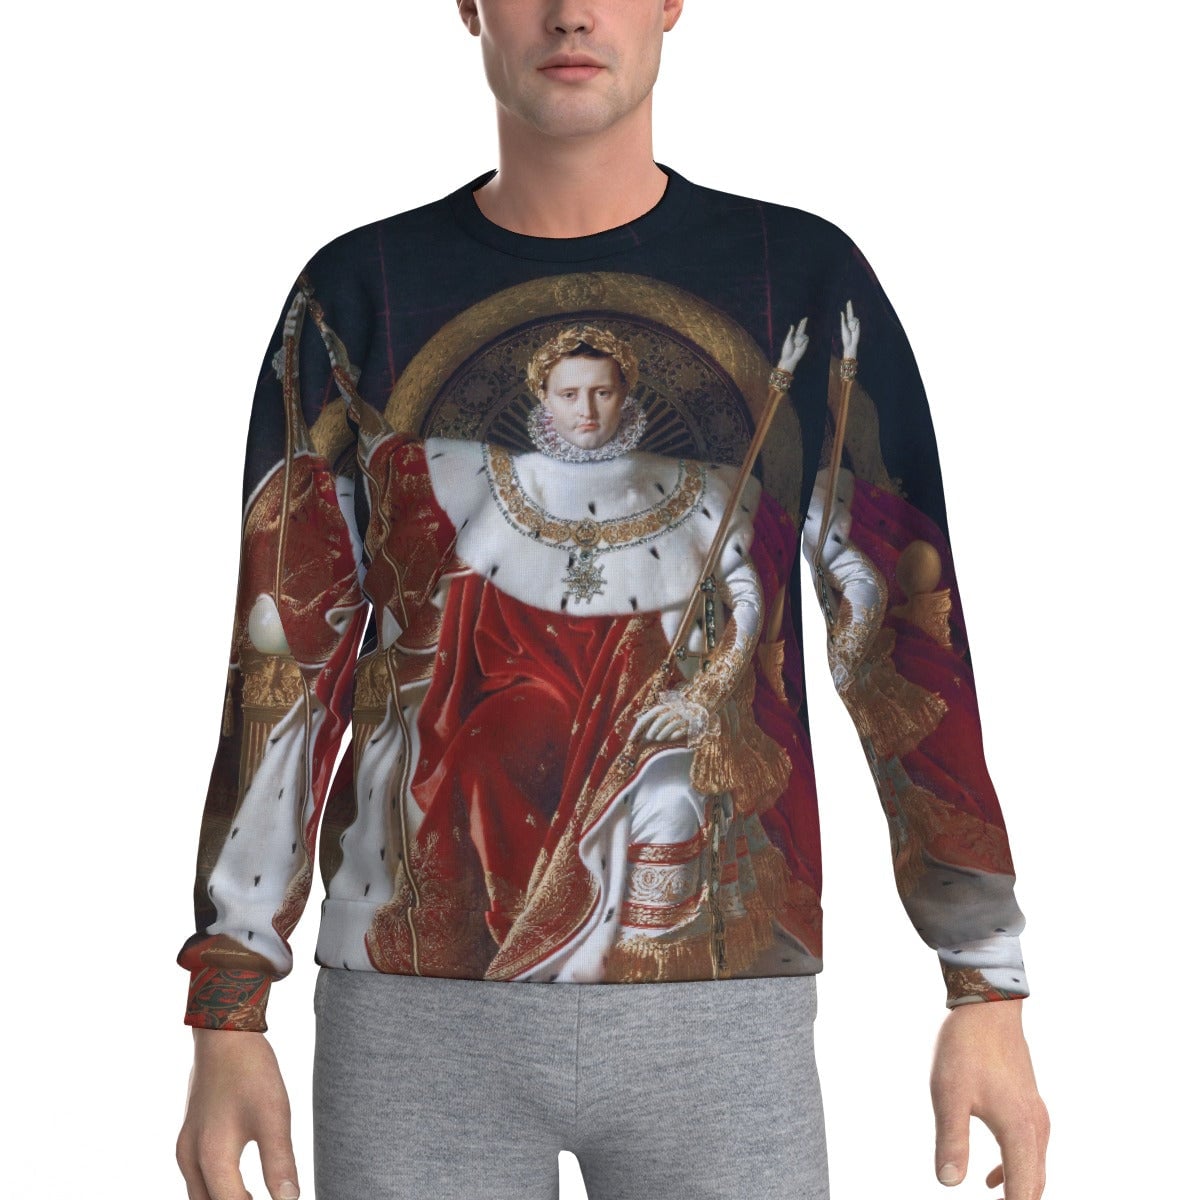 Napoleon I on His Imperial Throne Famous Painting Sweatshirt